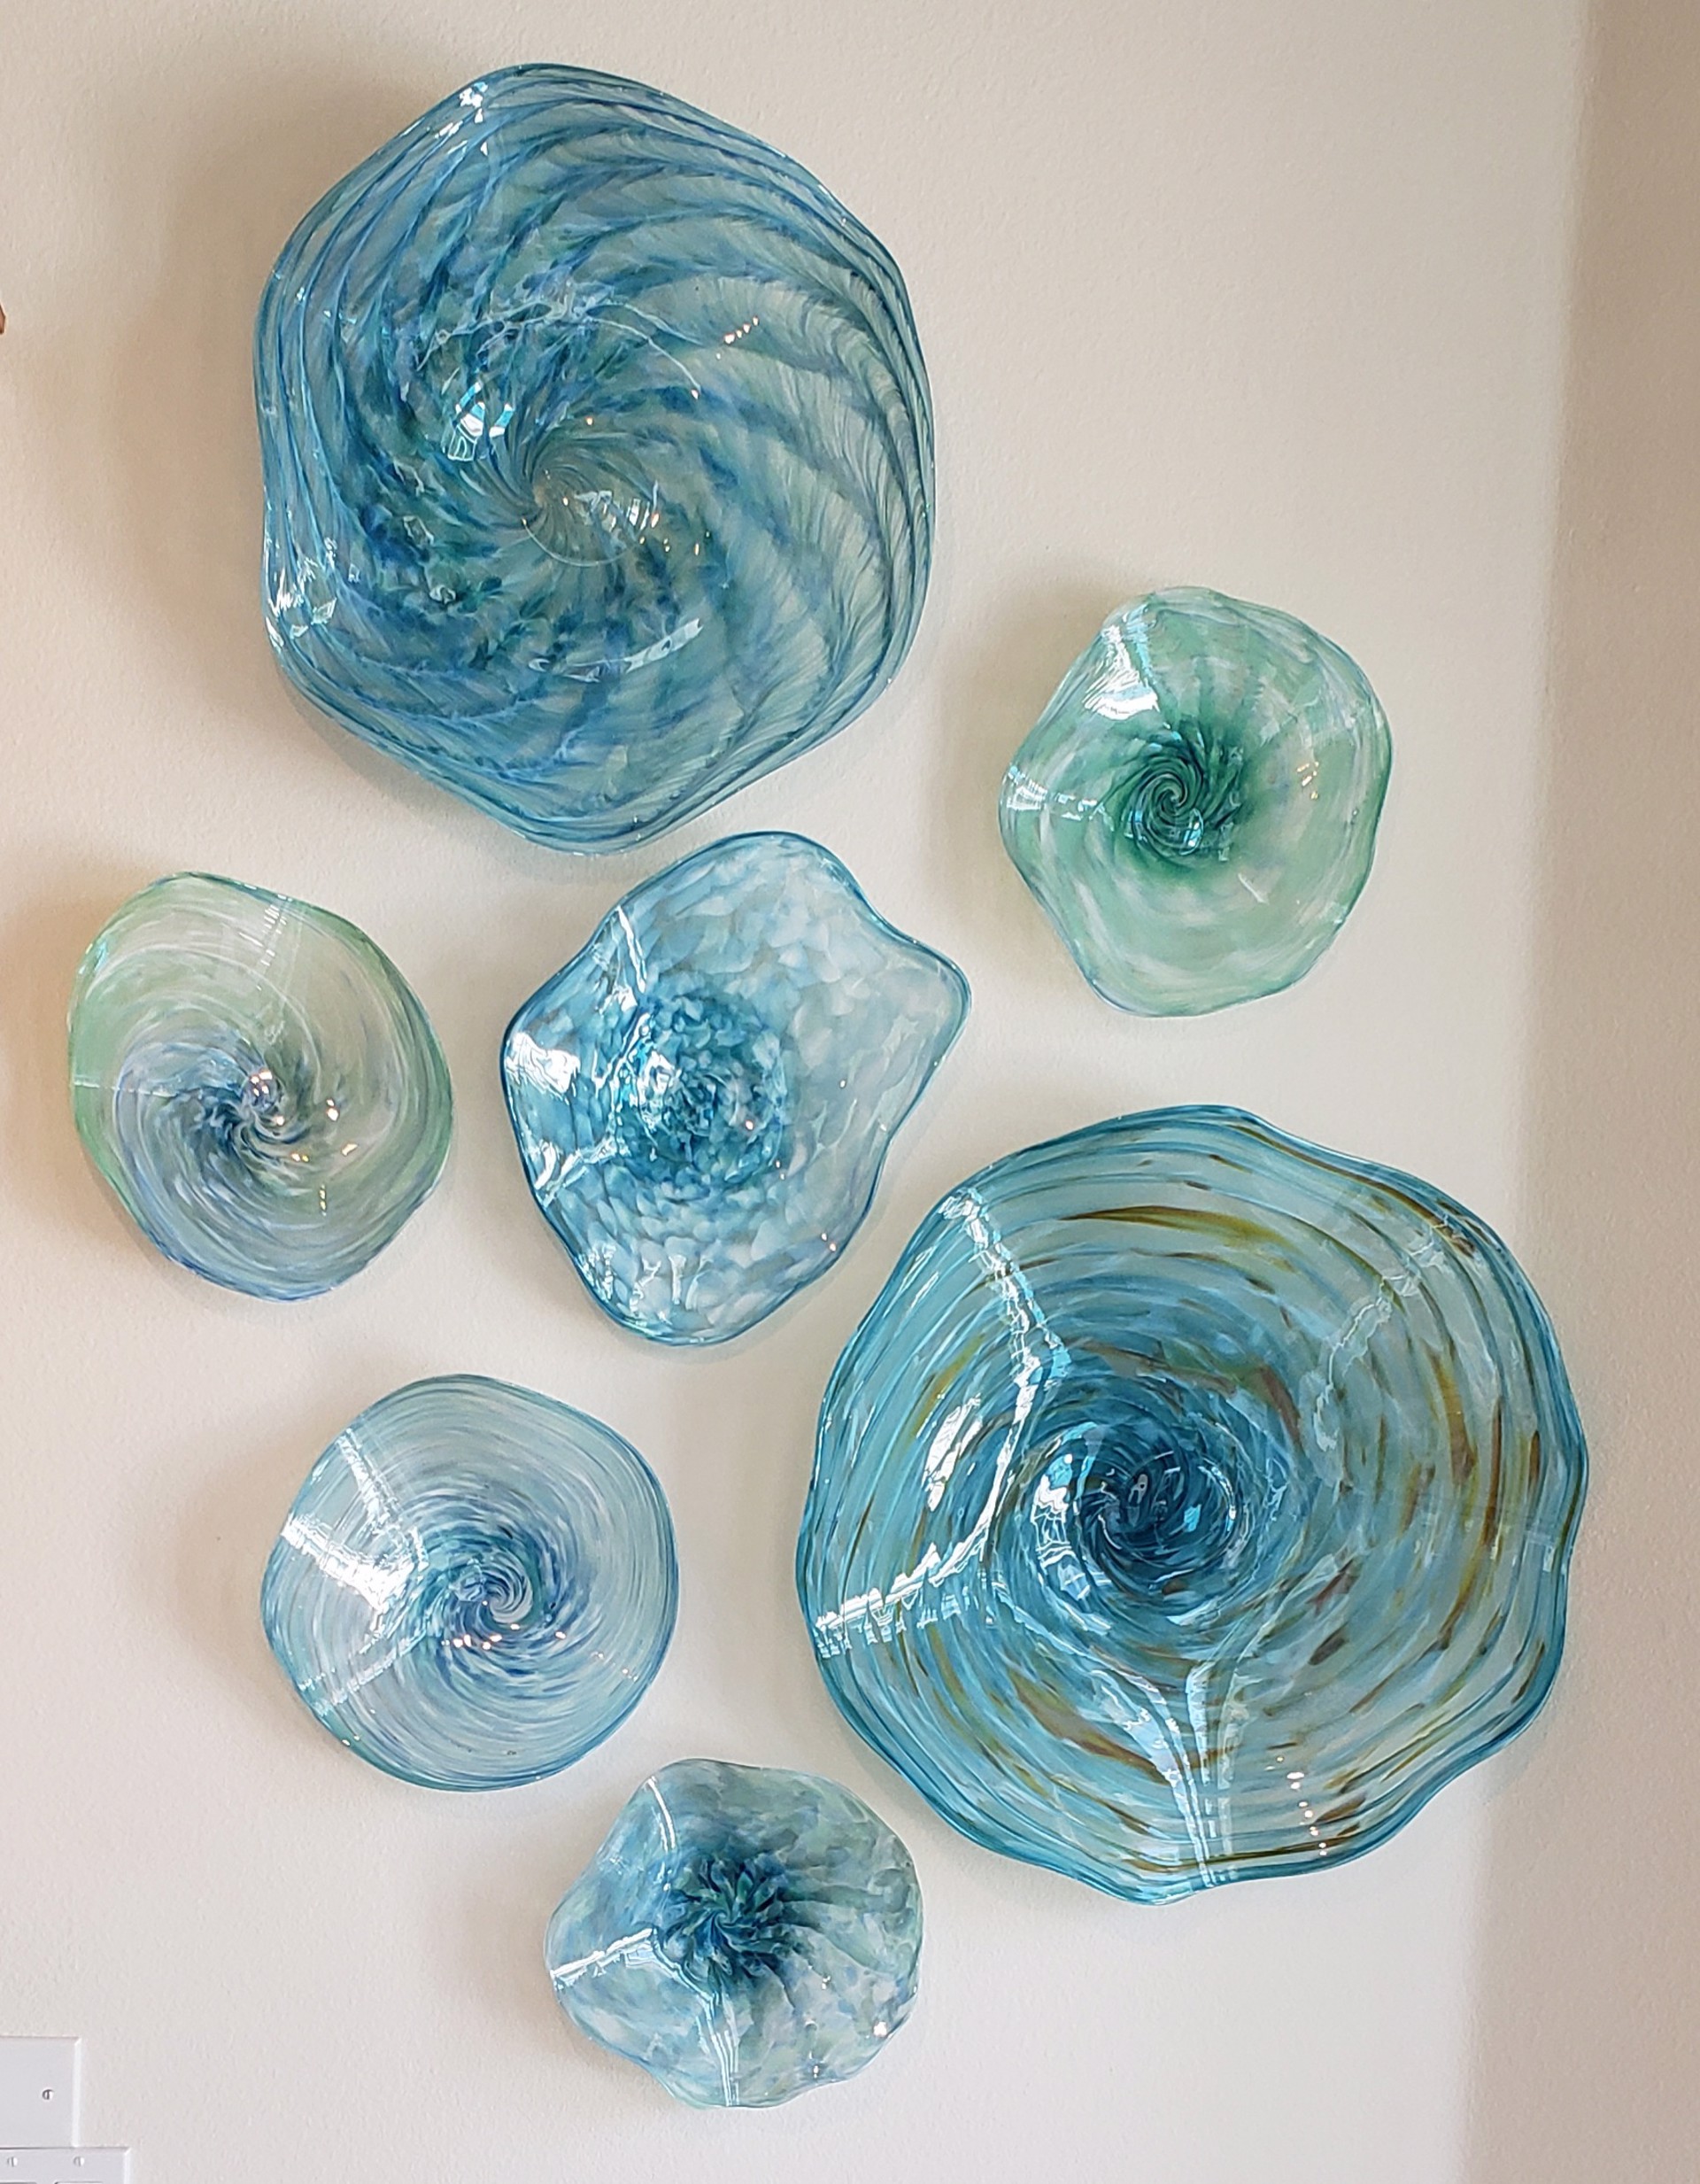 7 Piece Glass Blossom Installation by T. Miller